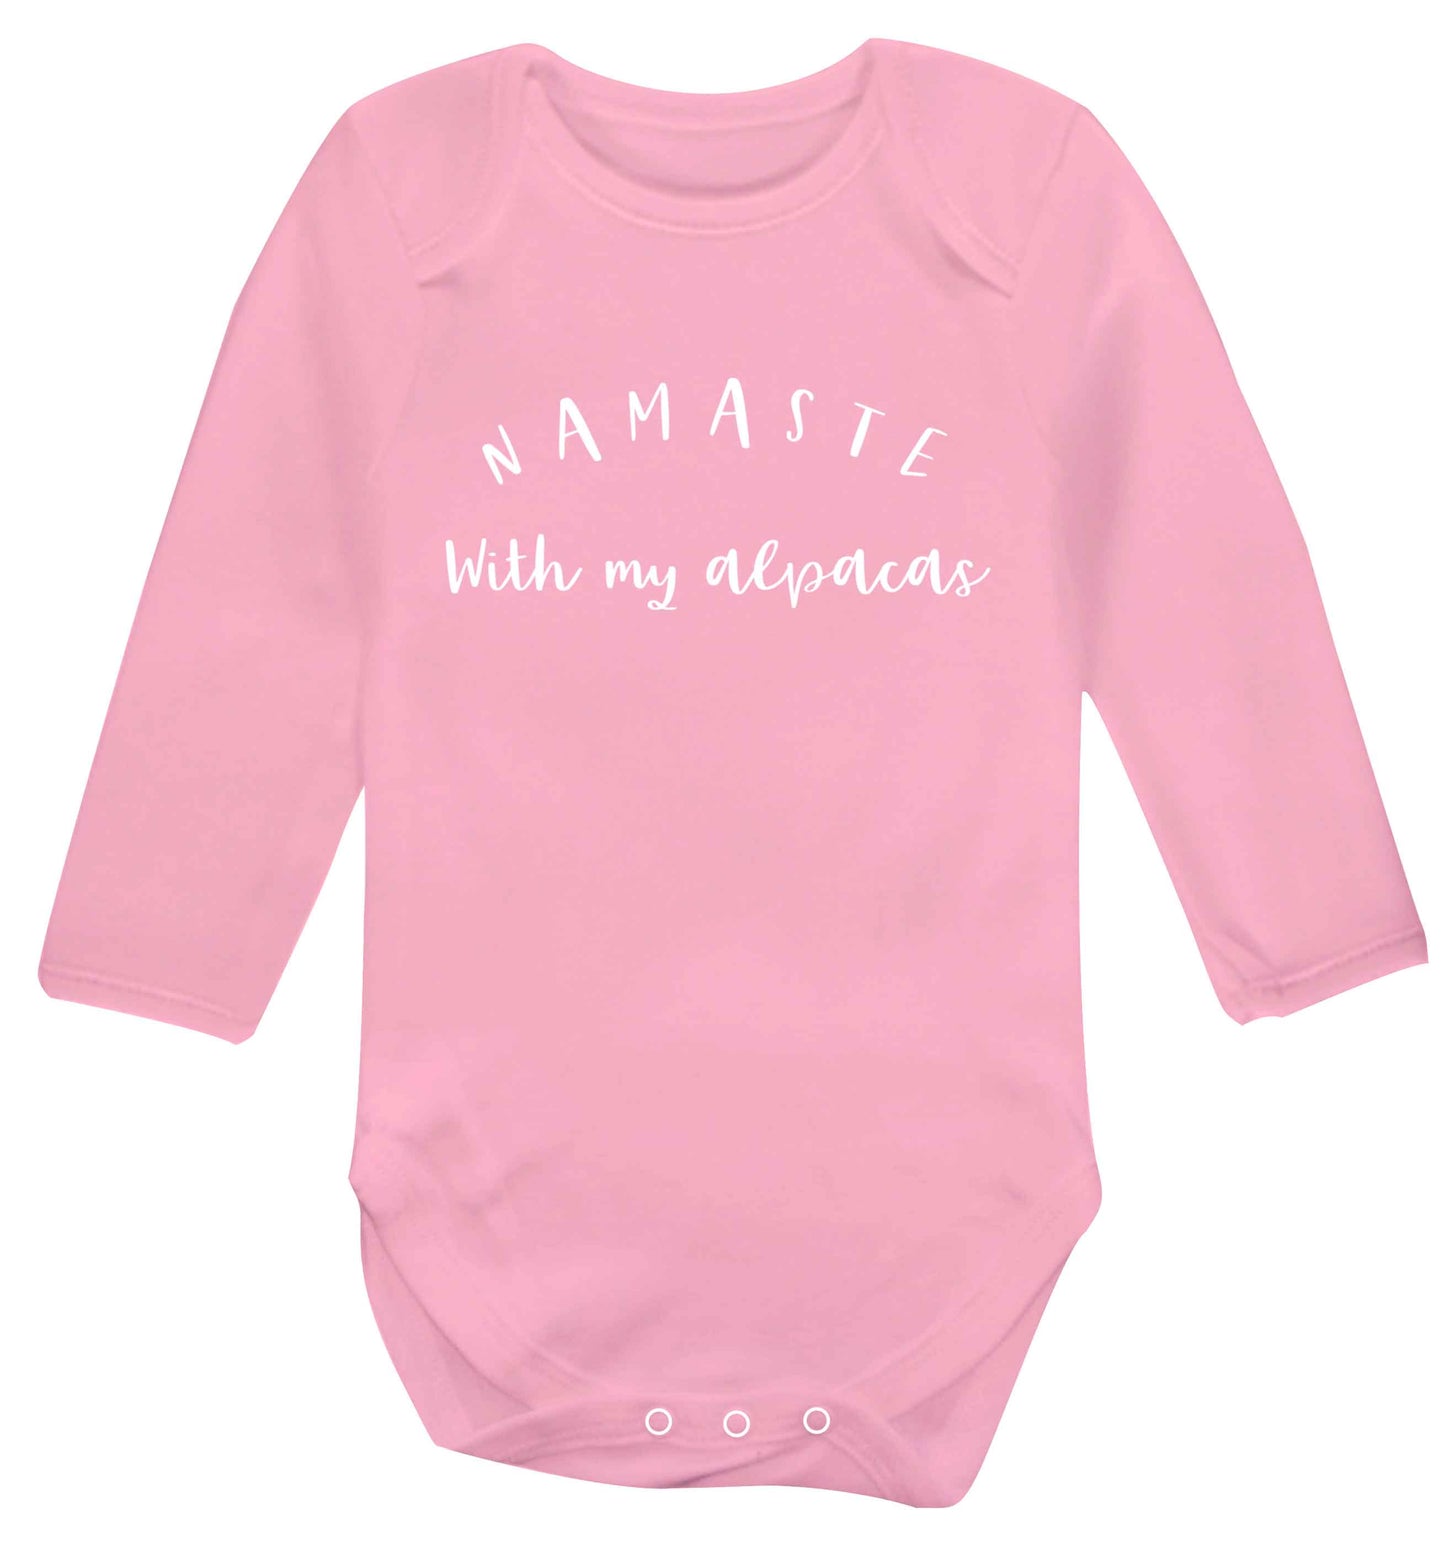 Namaste with my alpacas Baby Vest long sleeved pale pink 6-12 months